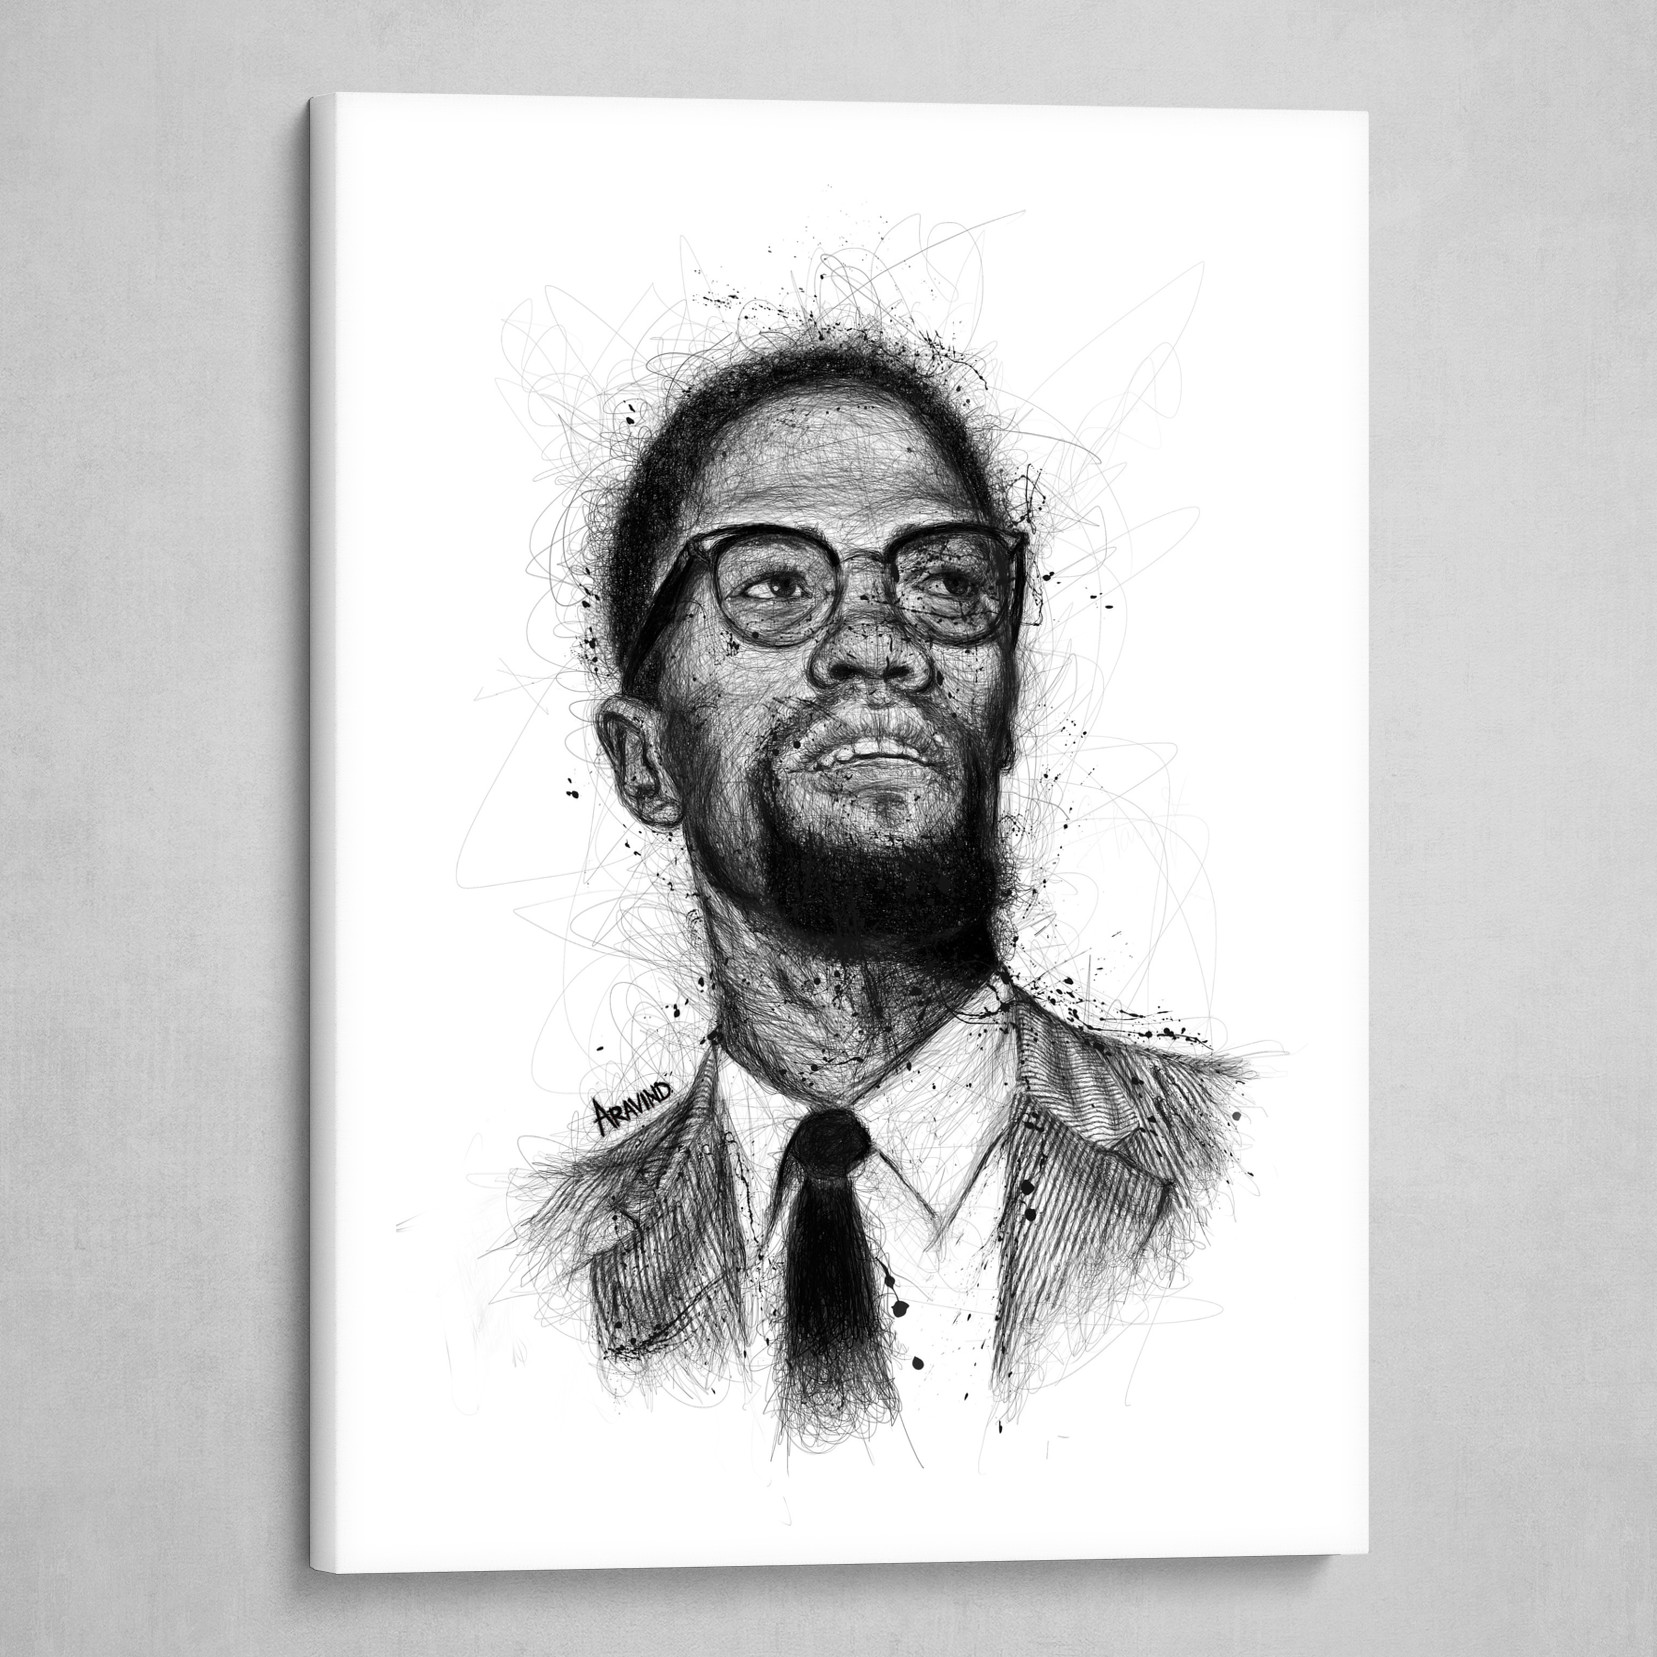 LOOKS AWESOME FRAMED BEAUTIFUL POSTER  PRINT MALCOLM X 